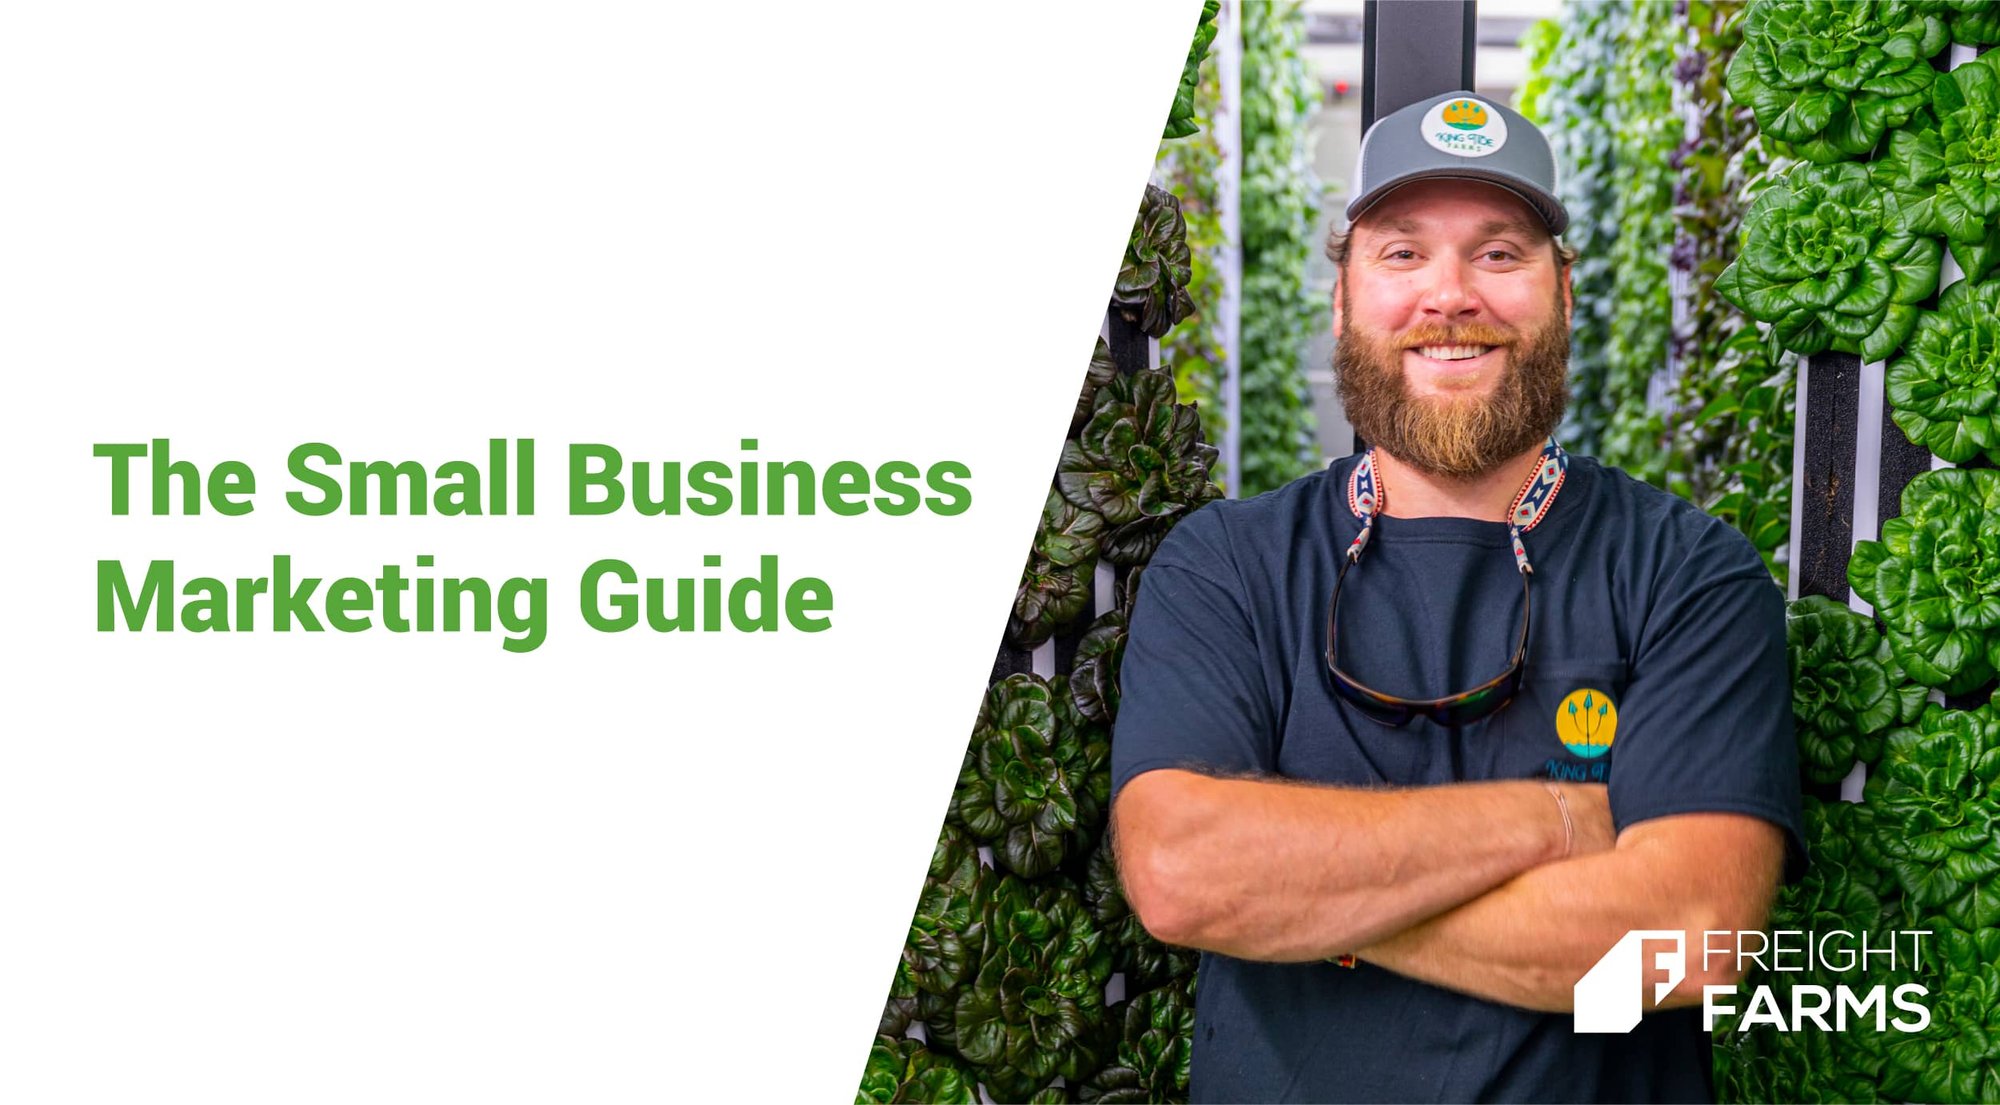 Small Business Marketing Guide